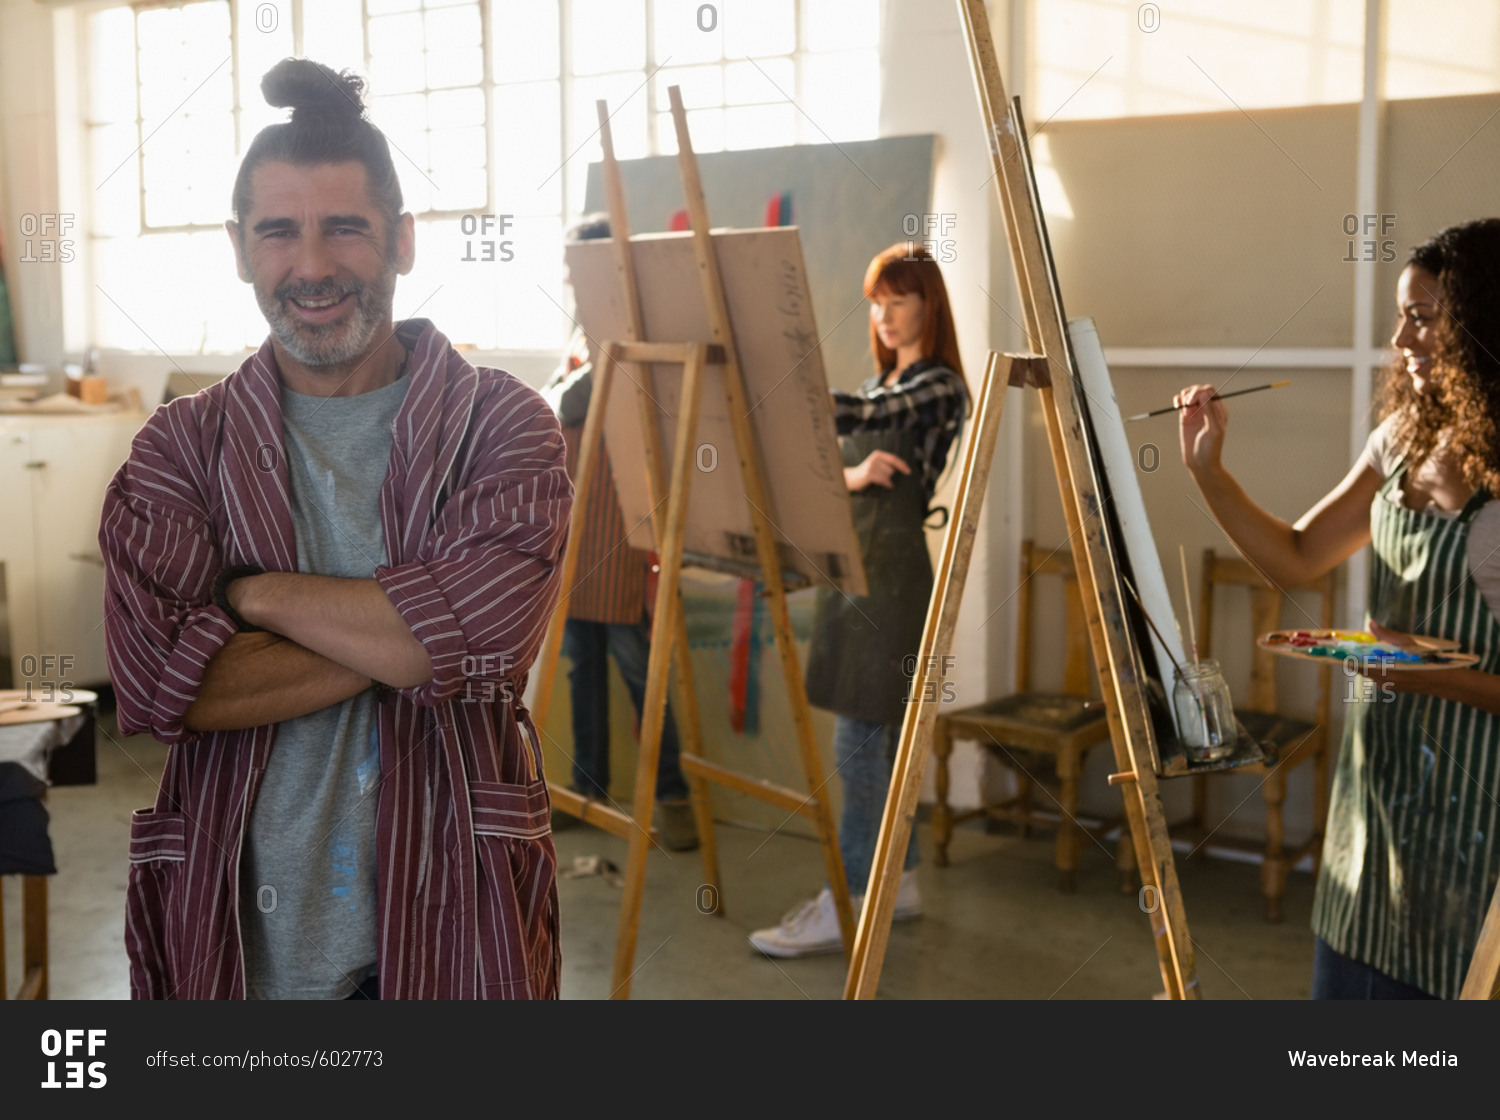 Portrait of smiling woman with arms crossed with friends painting in background at art class